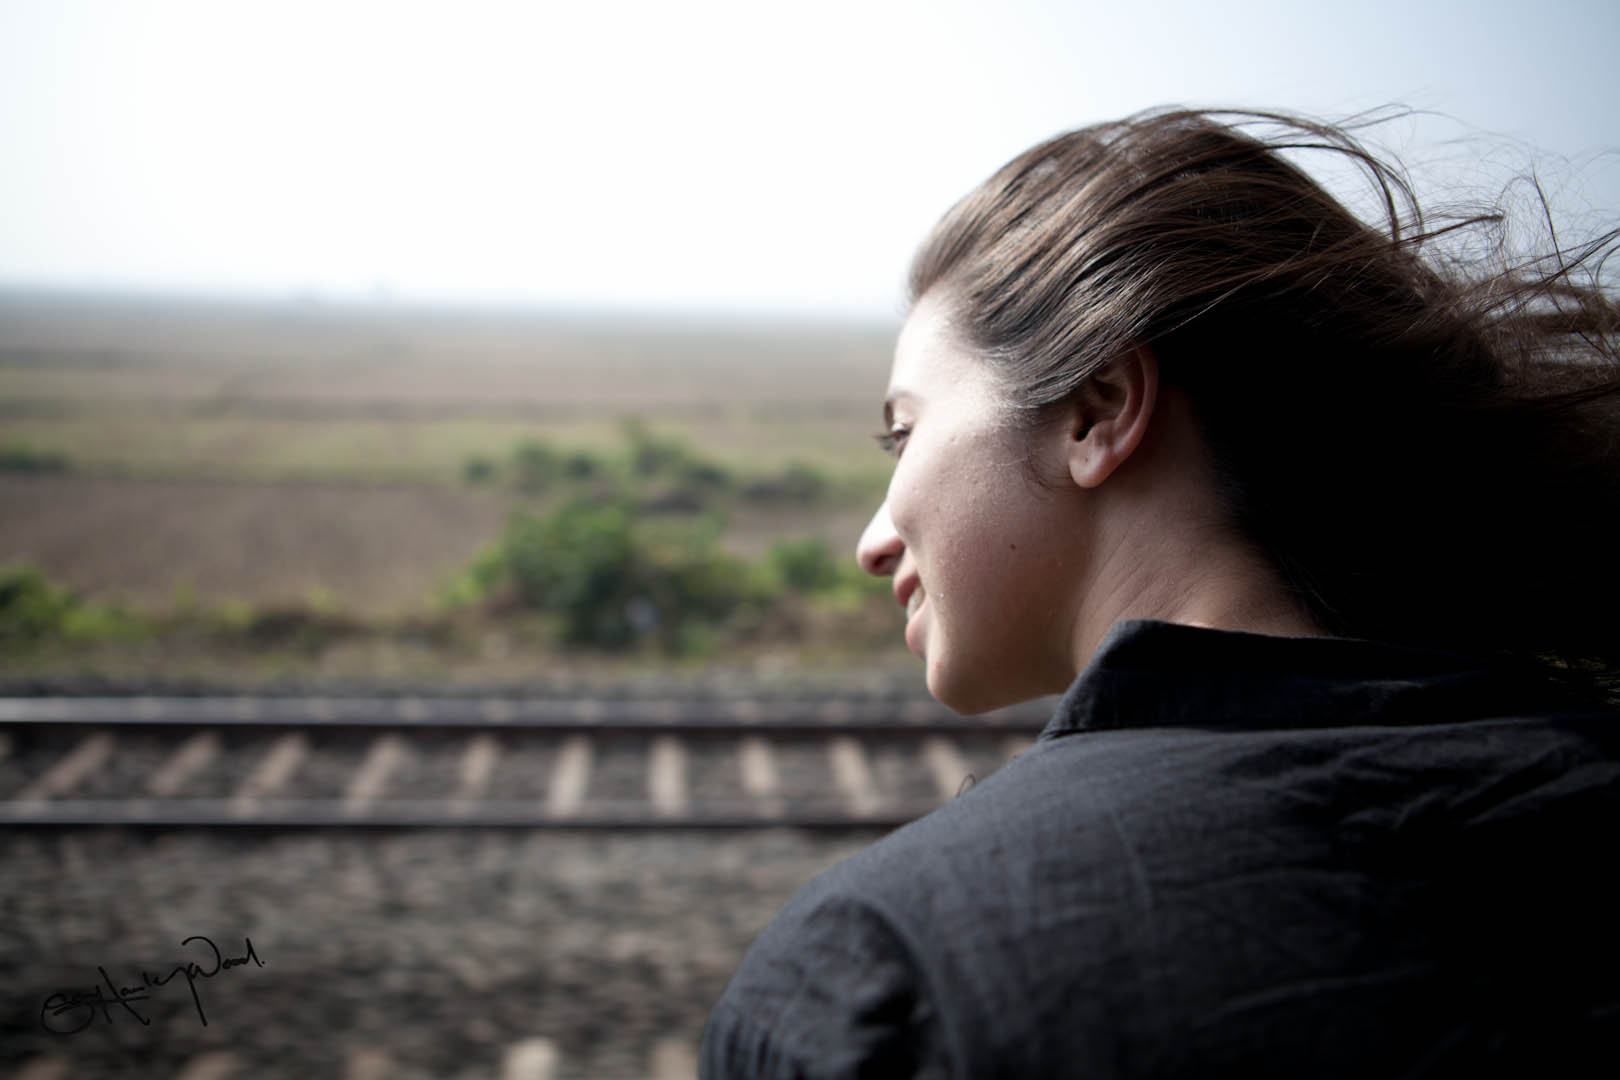 a woman standing on a train track facing the right